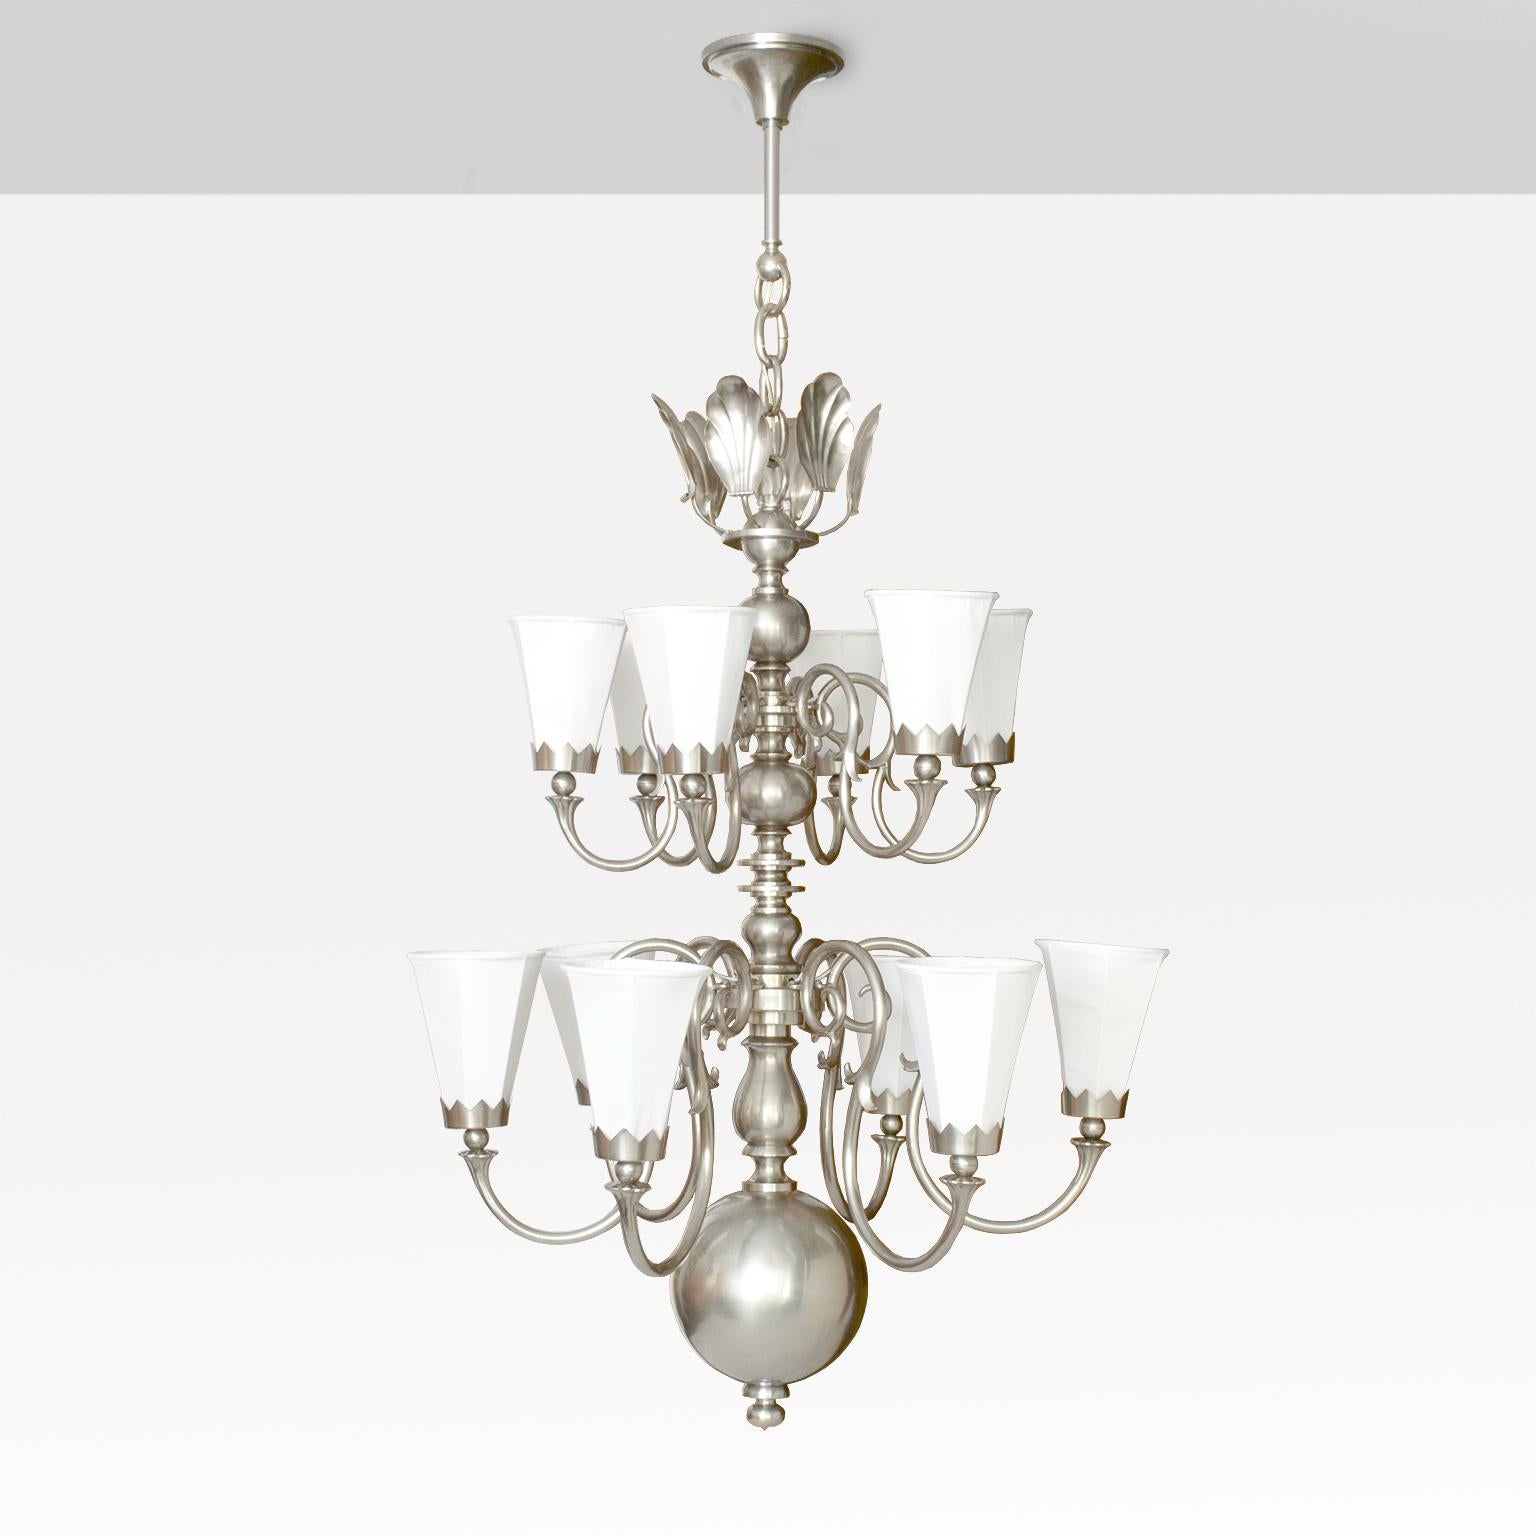 Large 1920's Scandinavian Modern 12-arm chandelier, brass with nickel plate finish. Each arm has a fabric covered 6-sided shade held in place with a crown shaped bobeche. The third-tier is a cluster of stylized shells which reflect light when the